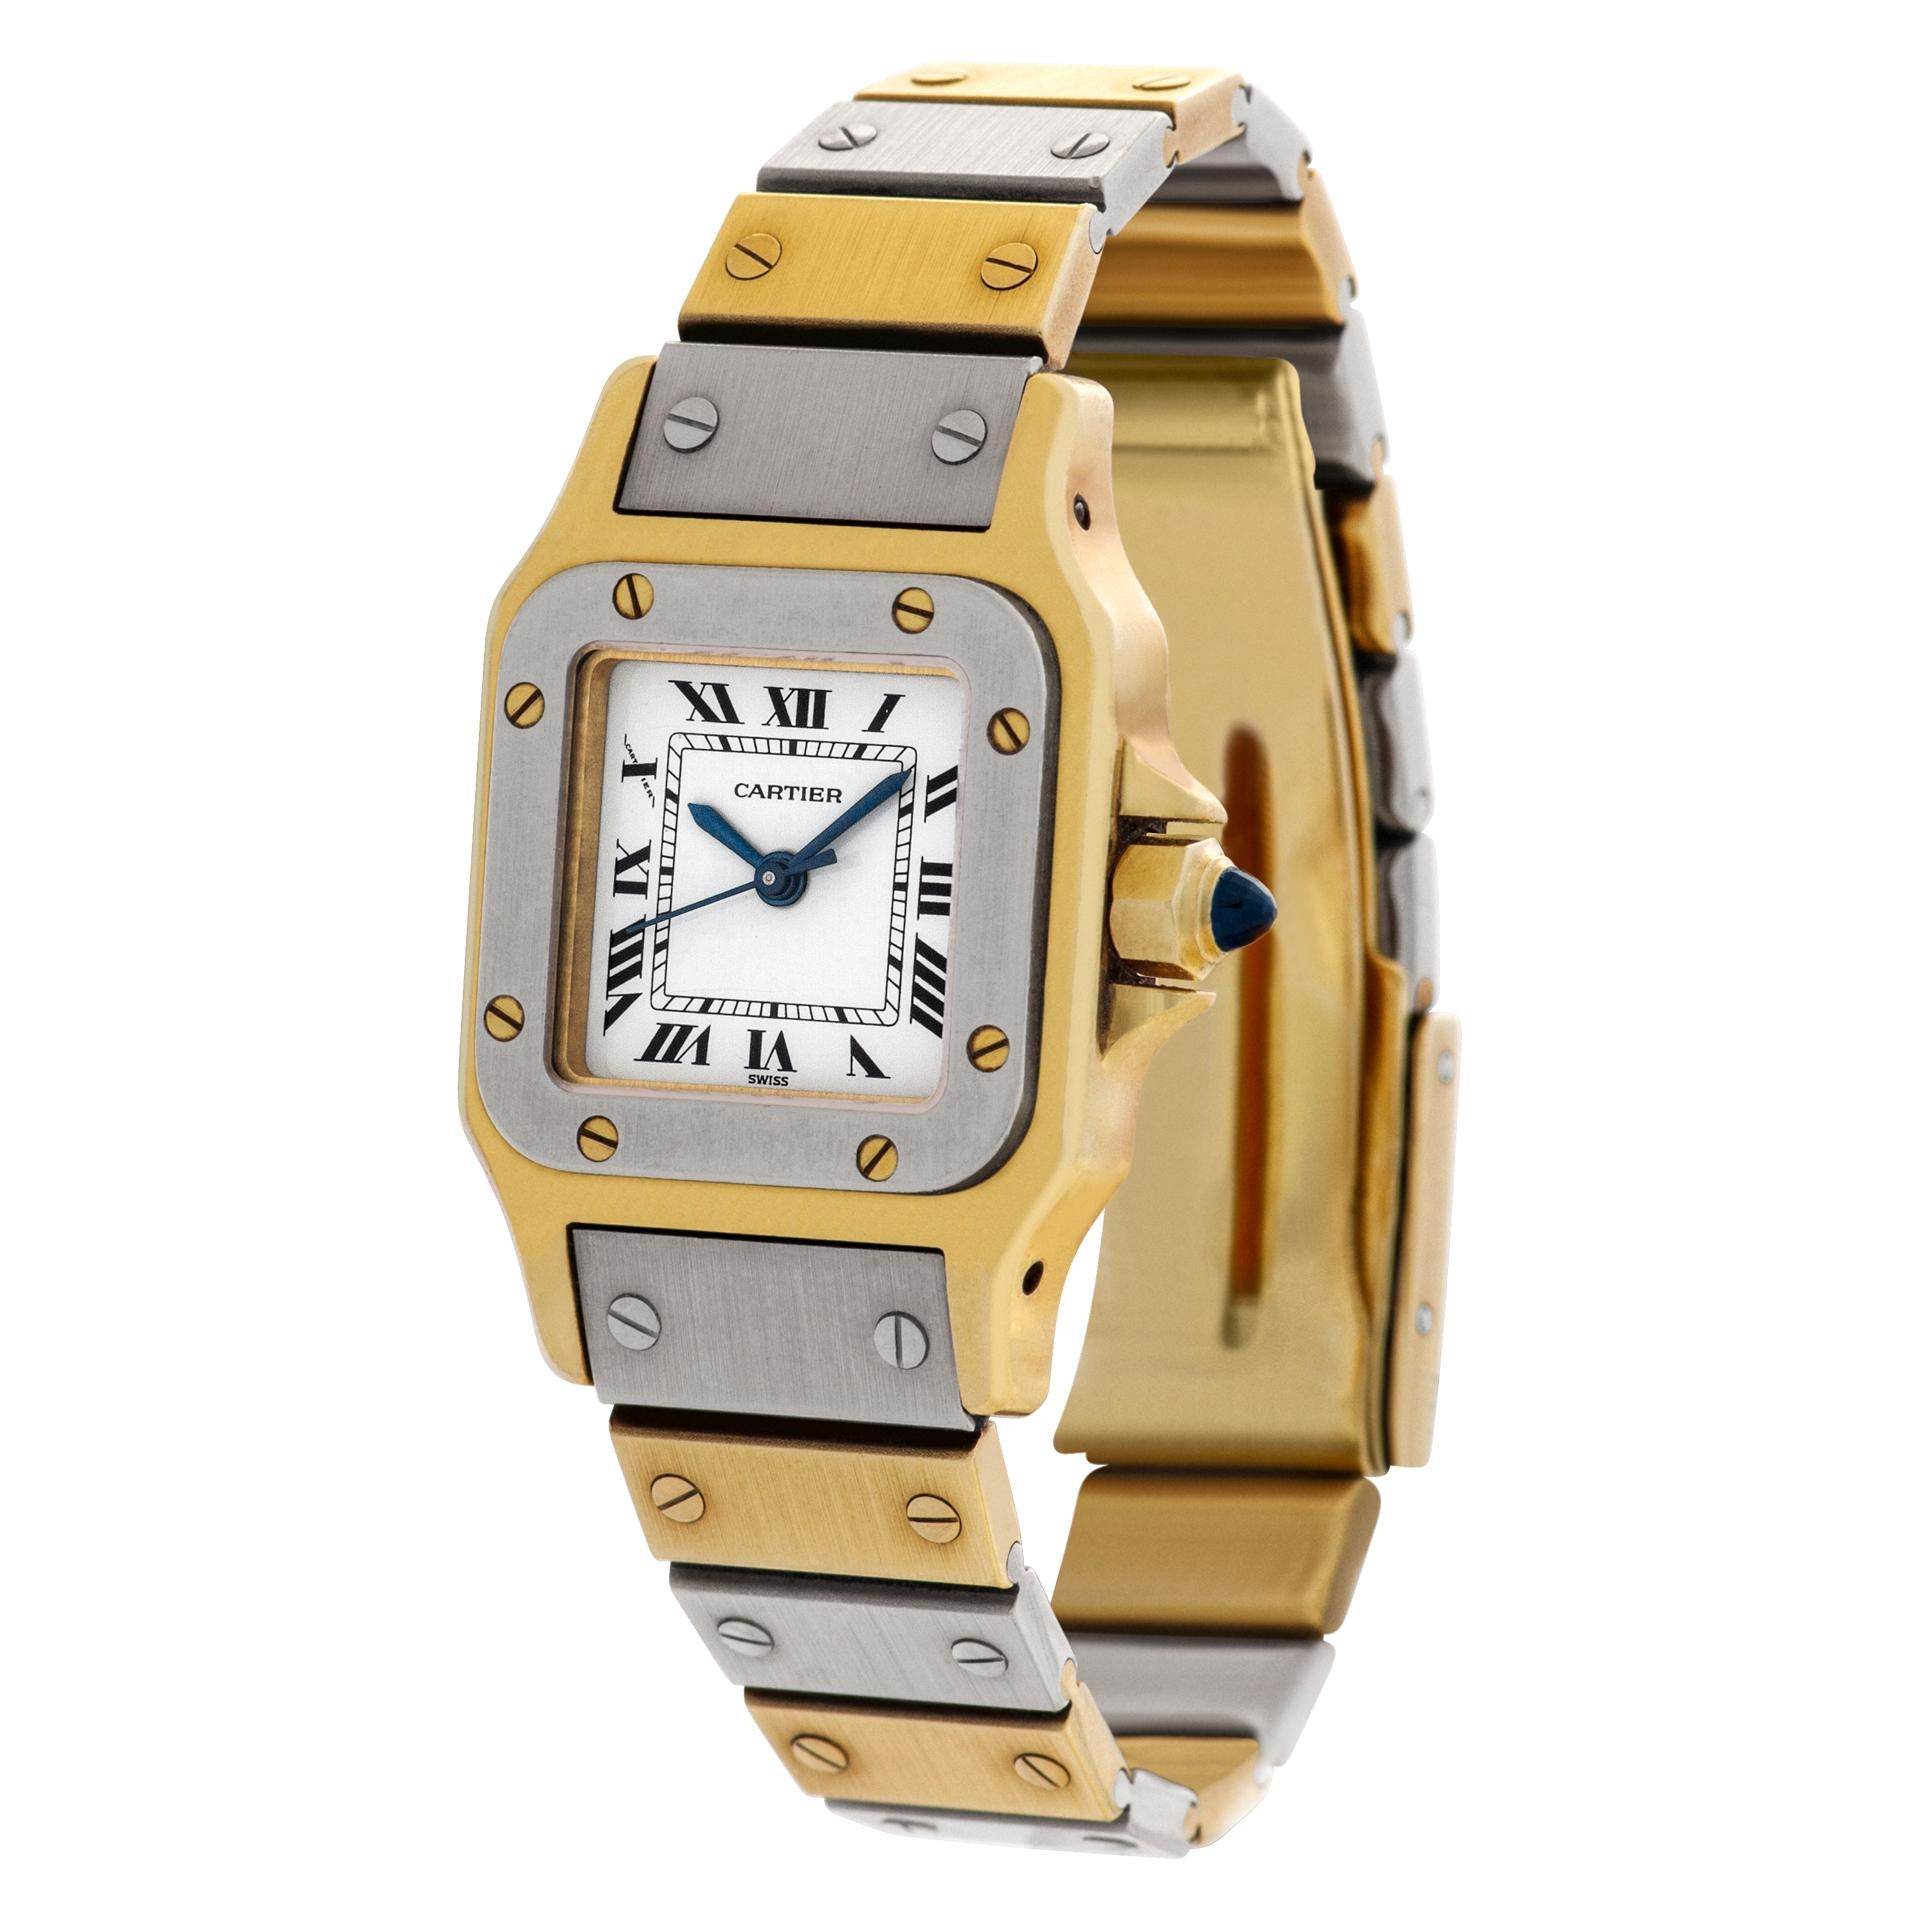 Unique & Limited! Cartier Santos in 18k white & yellow gold. Auto w/ sweep seconds. 24 mm case size. Fits 6.5 inches wrist. Circa 1990's. Fine Pre-owned Cartier Watch. Certified preowned Vintage Cartier Santos Limited Edition watch is made out of